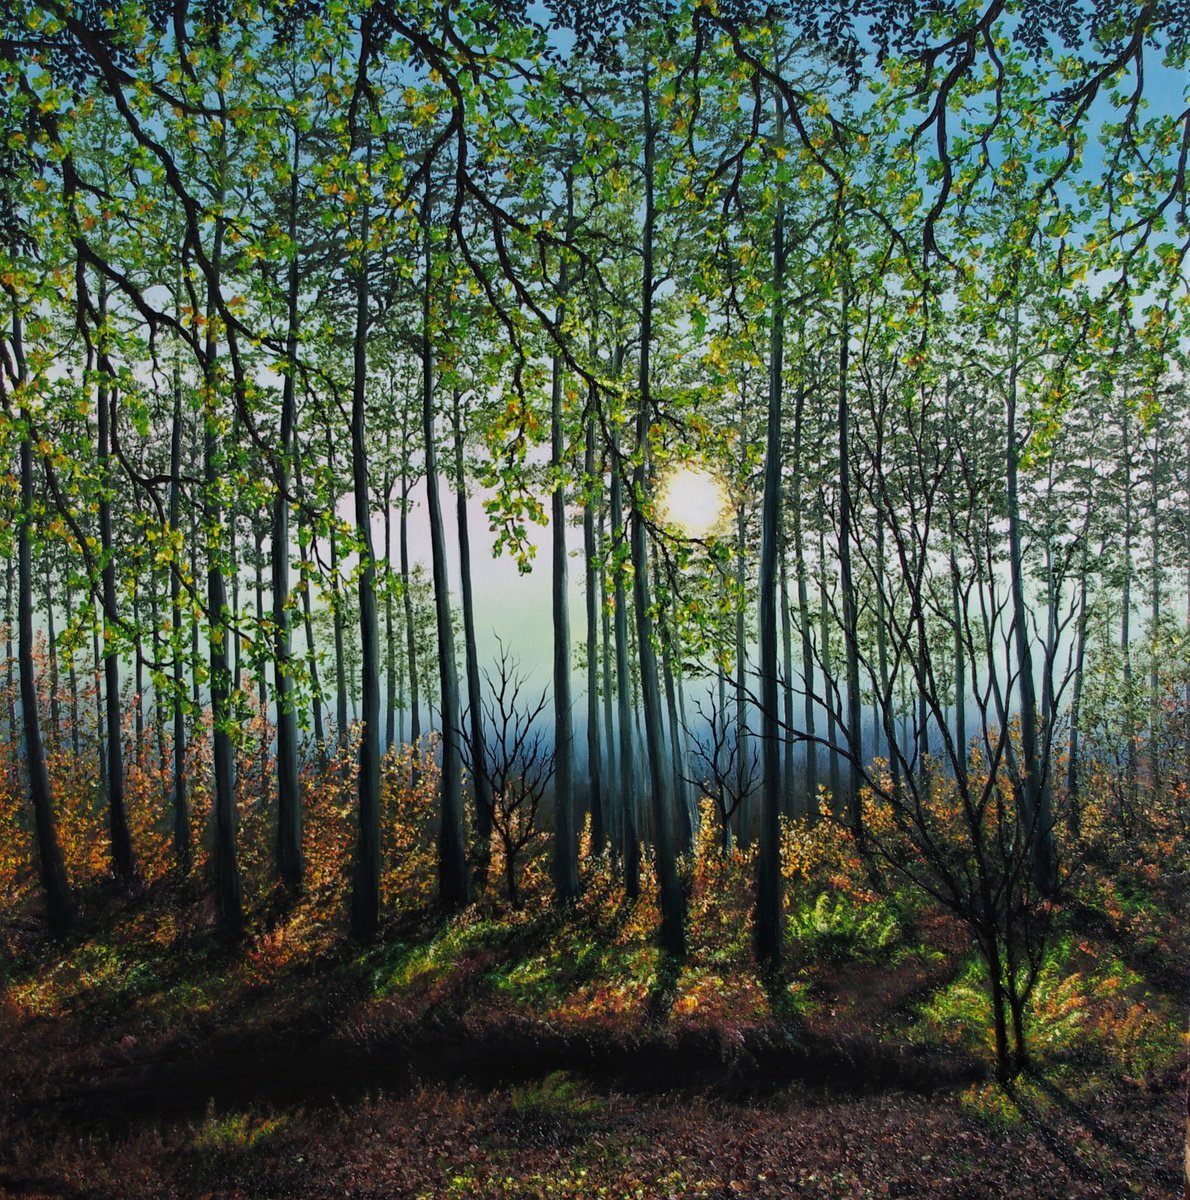 Tranquil evening in the forest by Hazel Thomson